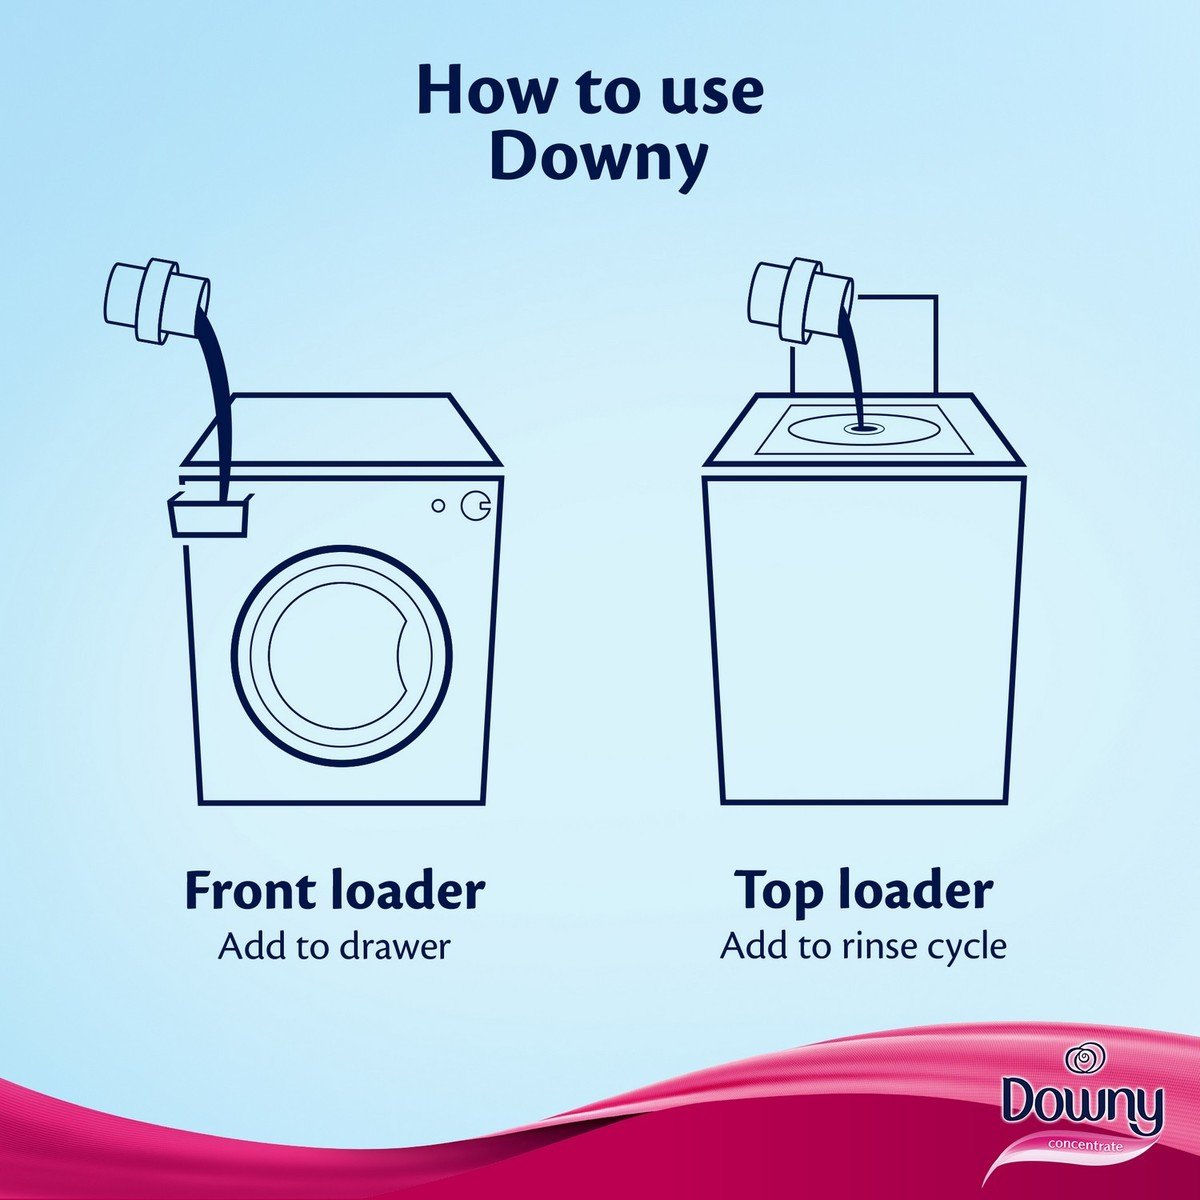 Downy Feel Luxurious Concentrate Fabric Softener 1.5Litre